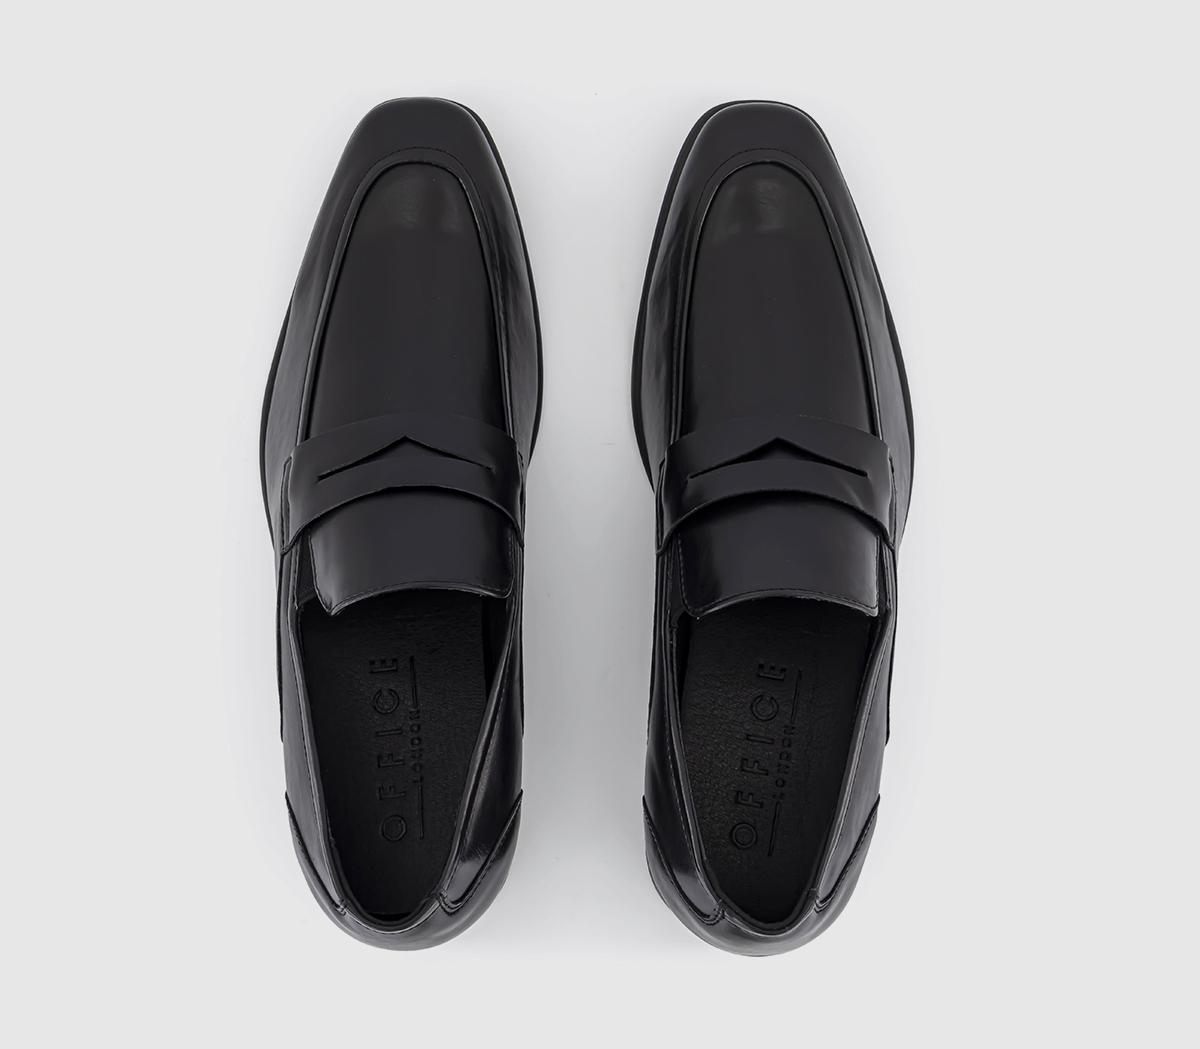 OFFICE Madison Penny Loafers Black - Men’s Loafers